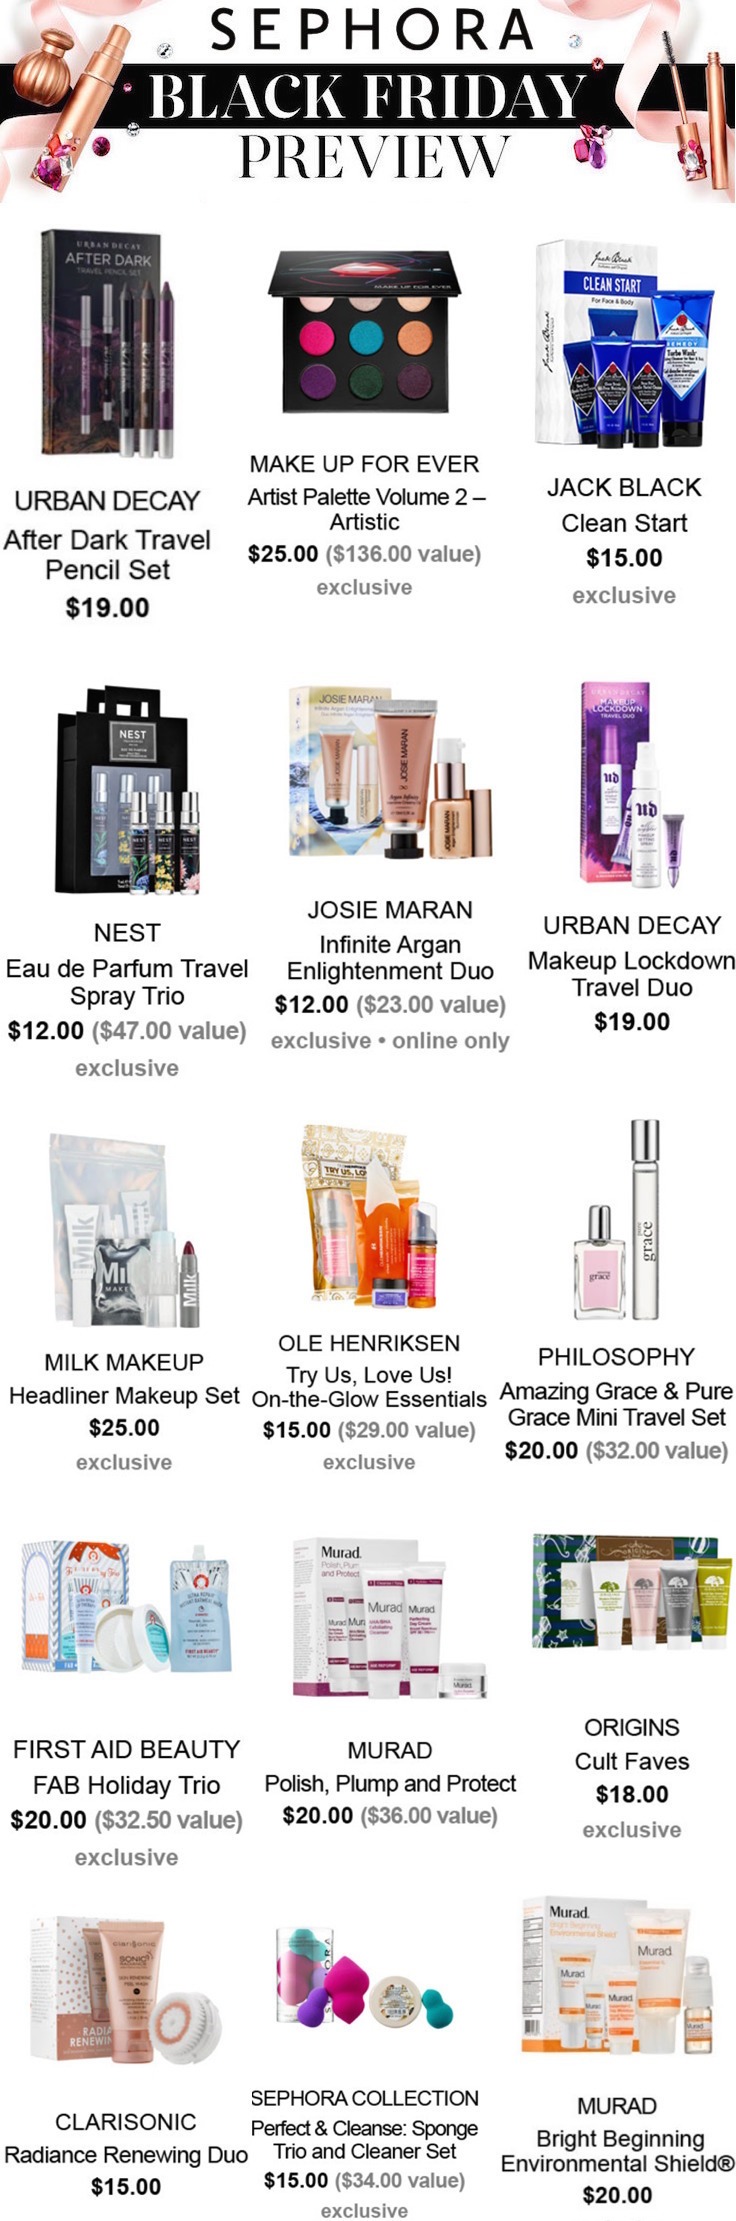 Sephora Black Friday 2016 Deals and Gift Sets